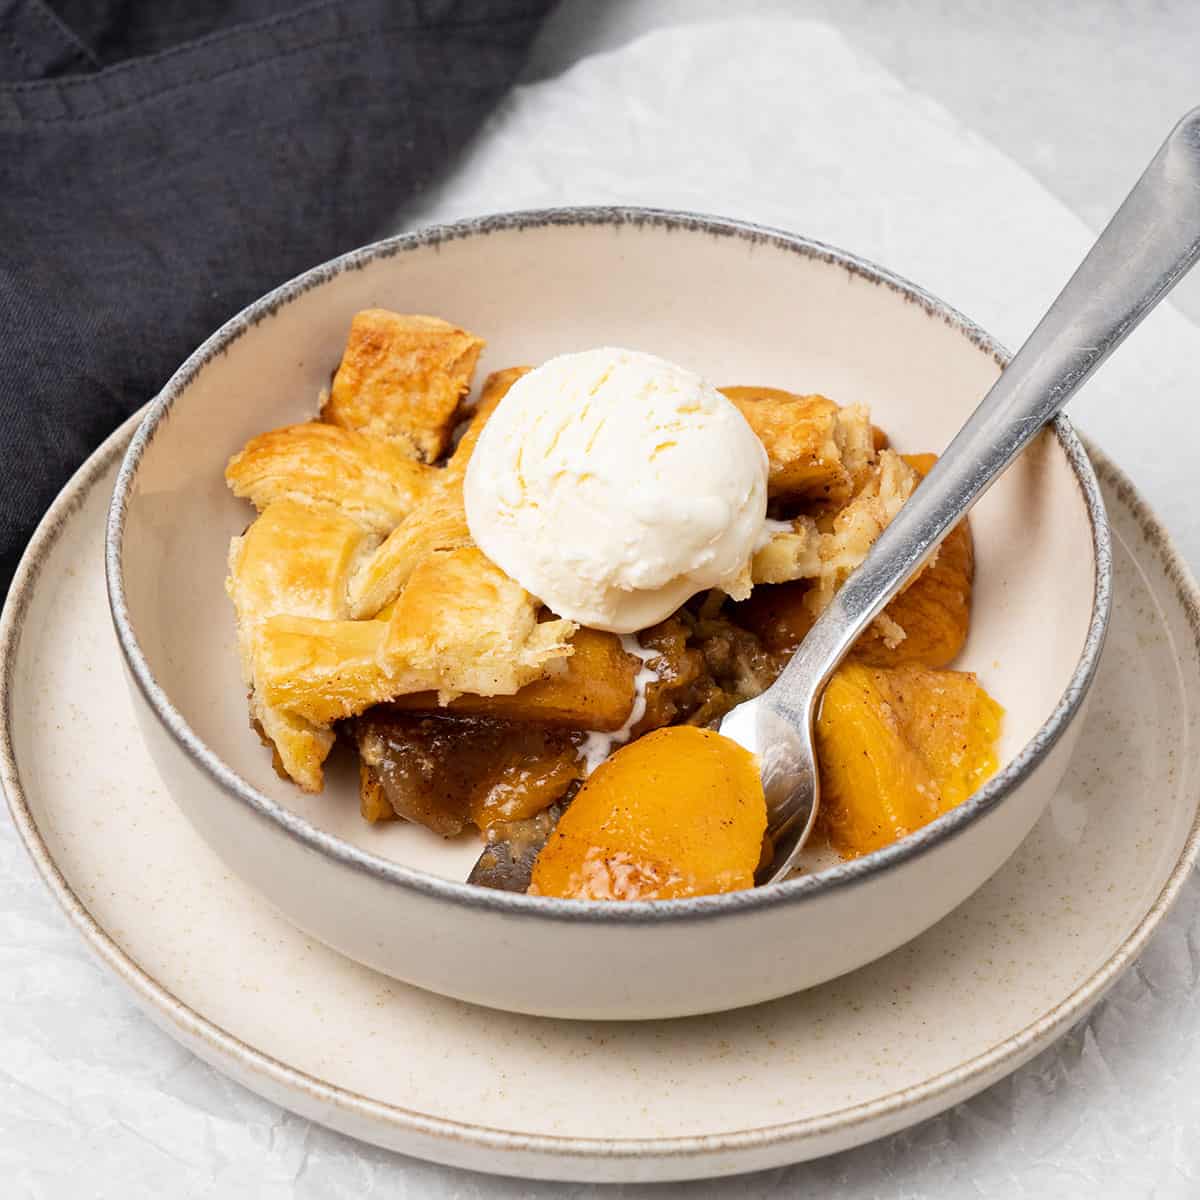 peach cobbler with pie crust and a scoop of ice cream.